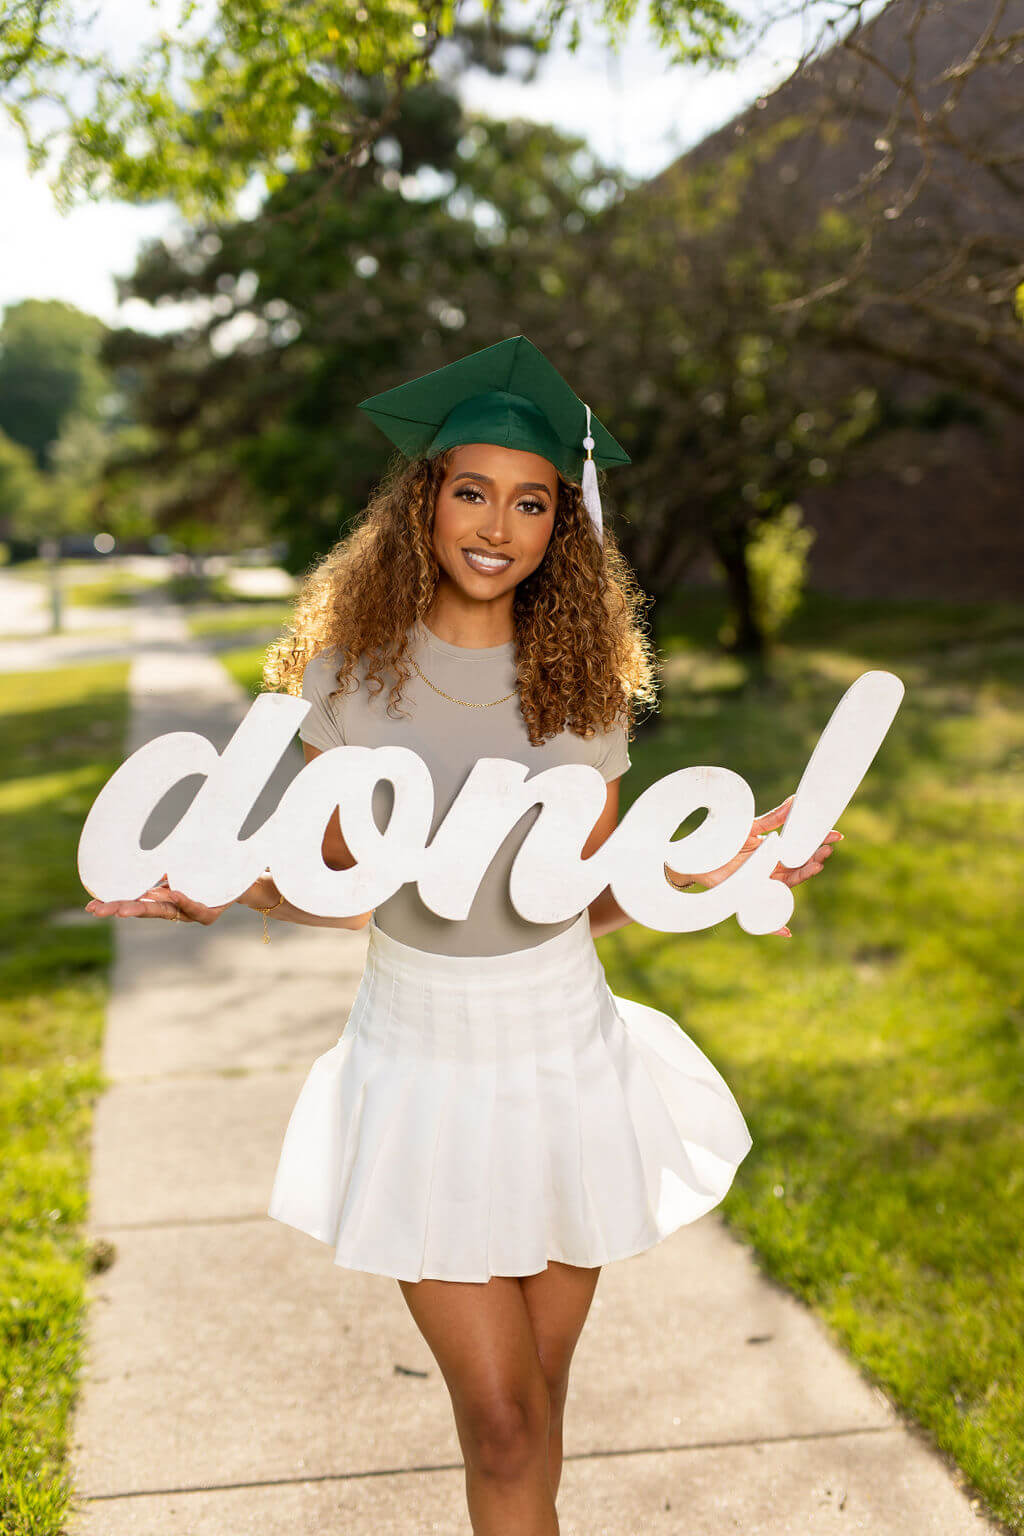 Senior model posing with "done!" photo prop. Model is outside on the sidewalk.